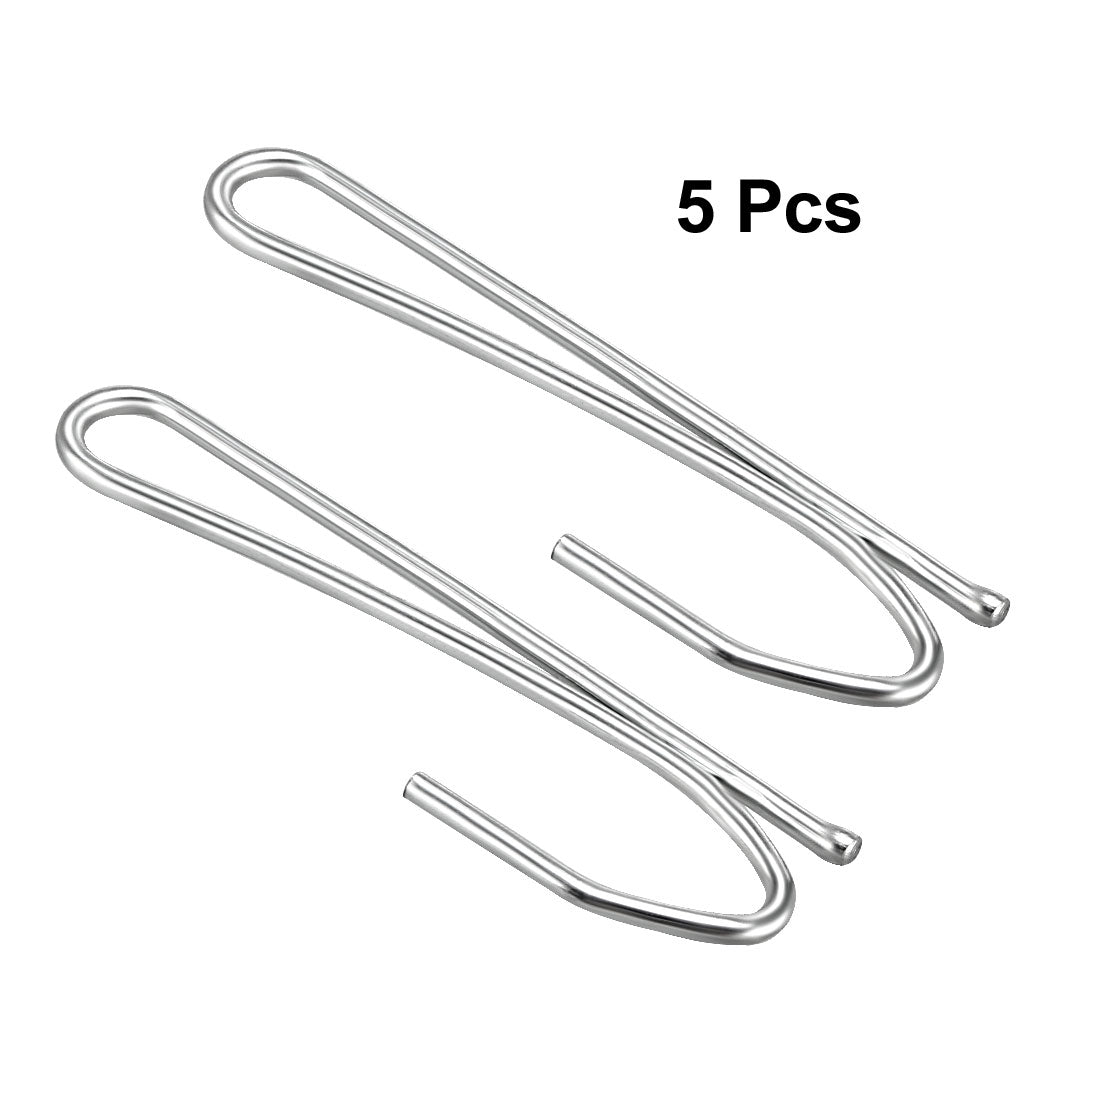 uxcell Uxcell Curtain Hooks Metal Single Prongs Pinch Pleat Drapery Hook for Drapes Tapes Silver Tone 5 Pcs